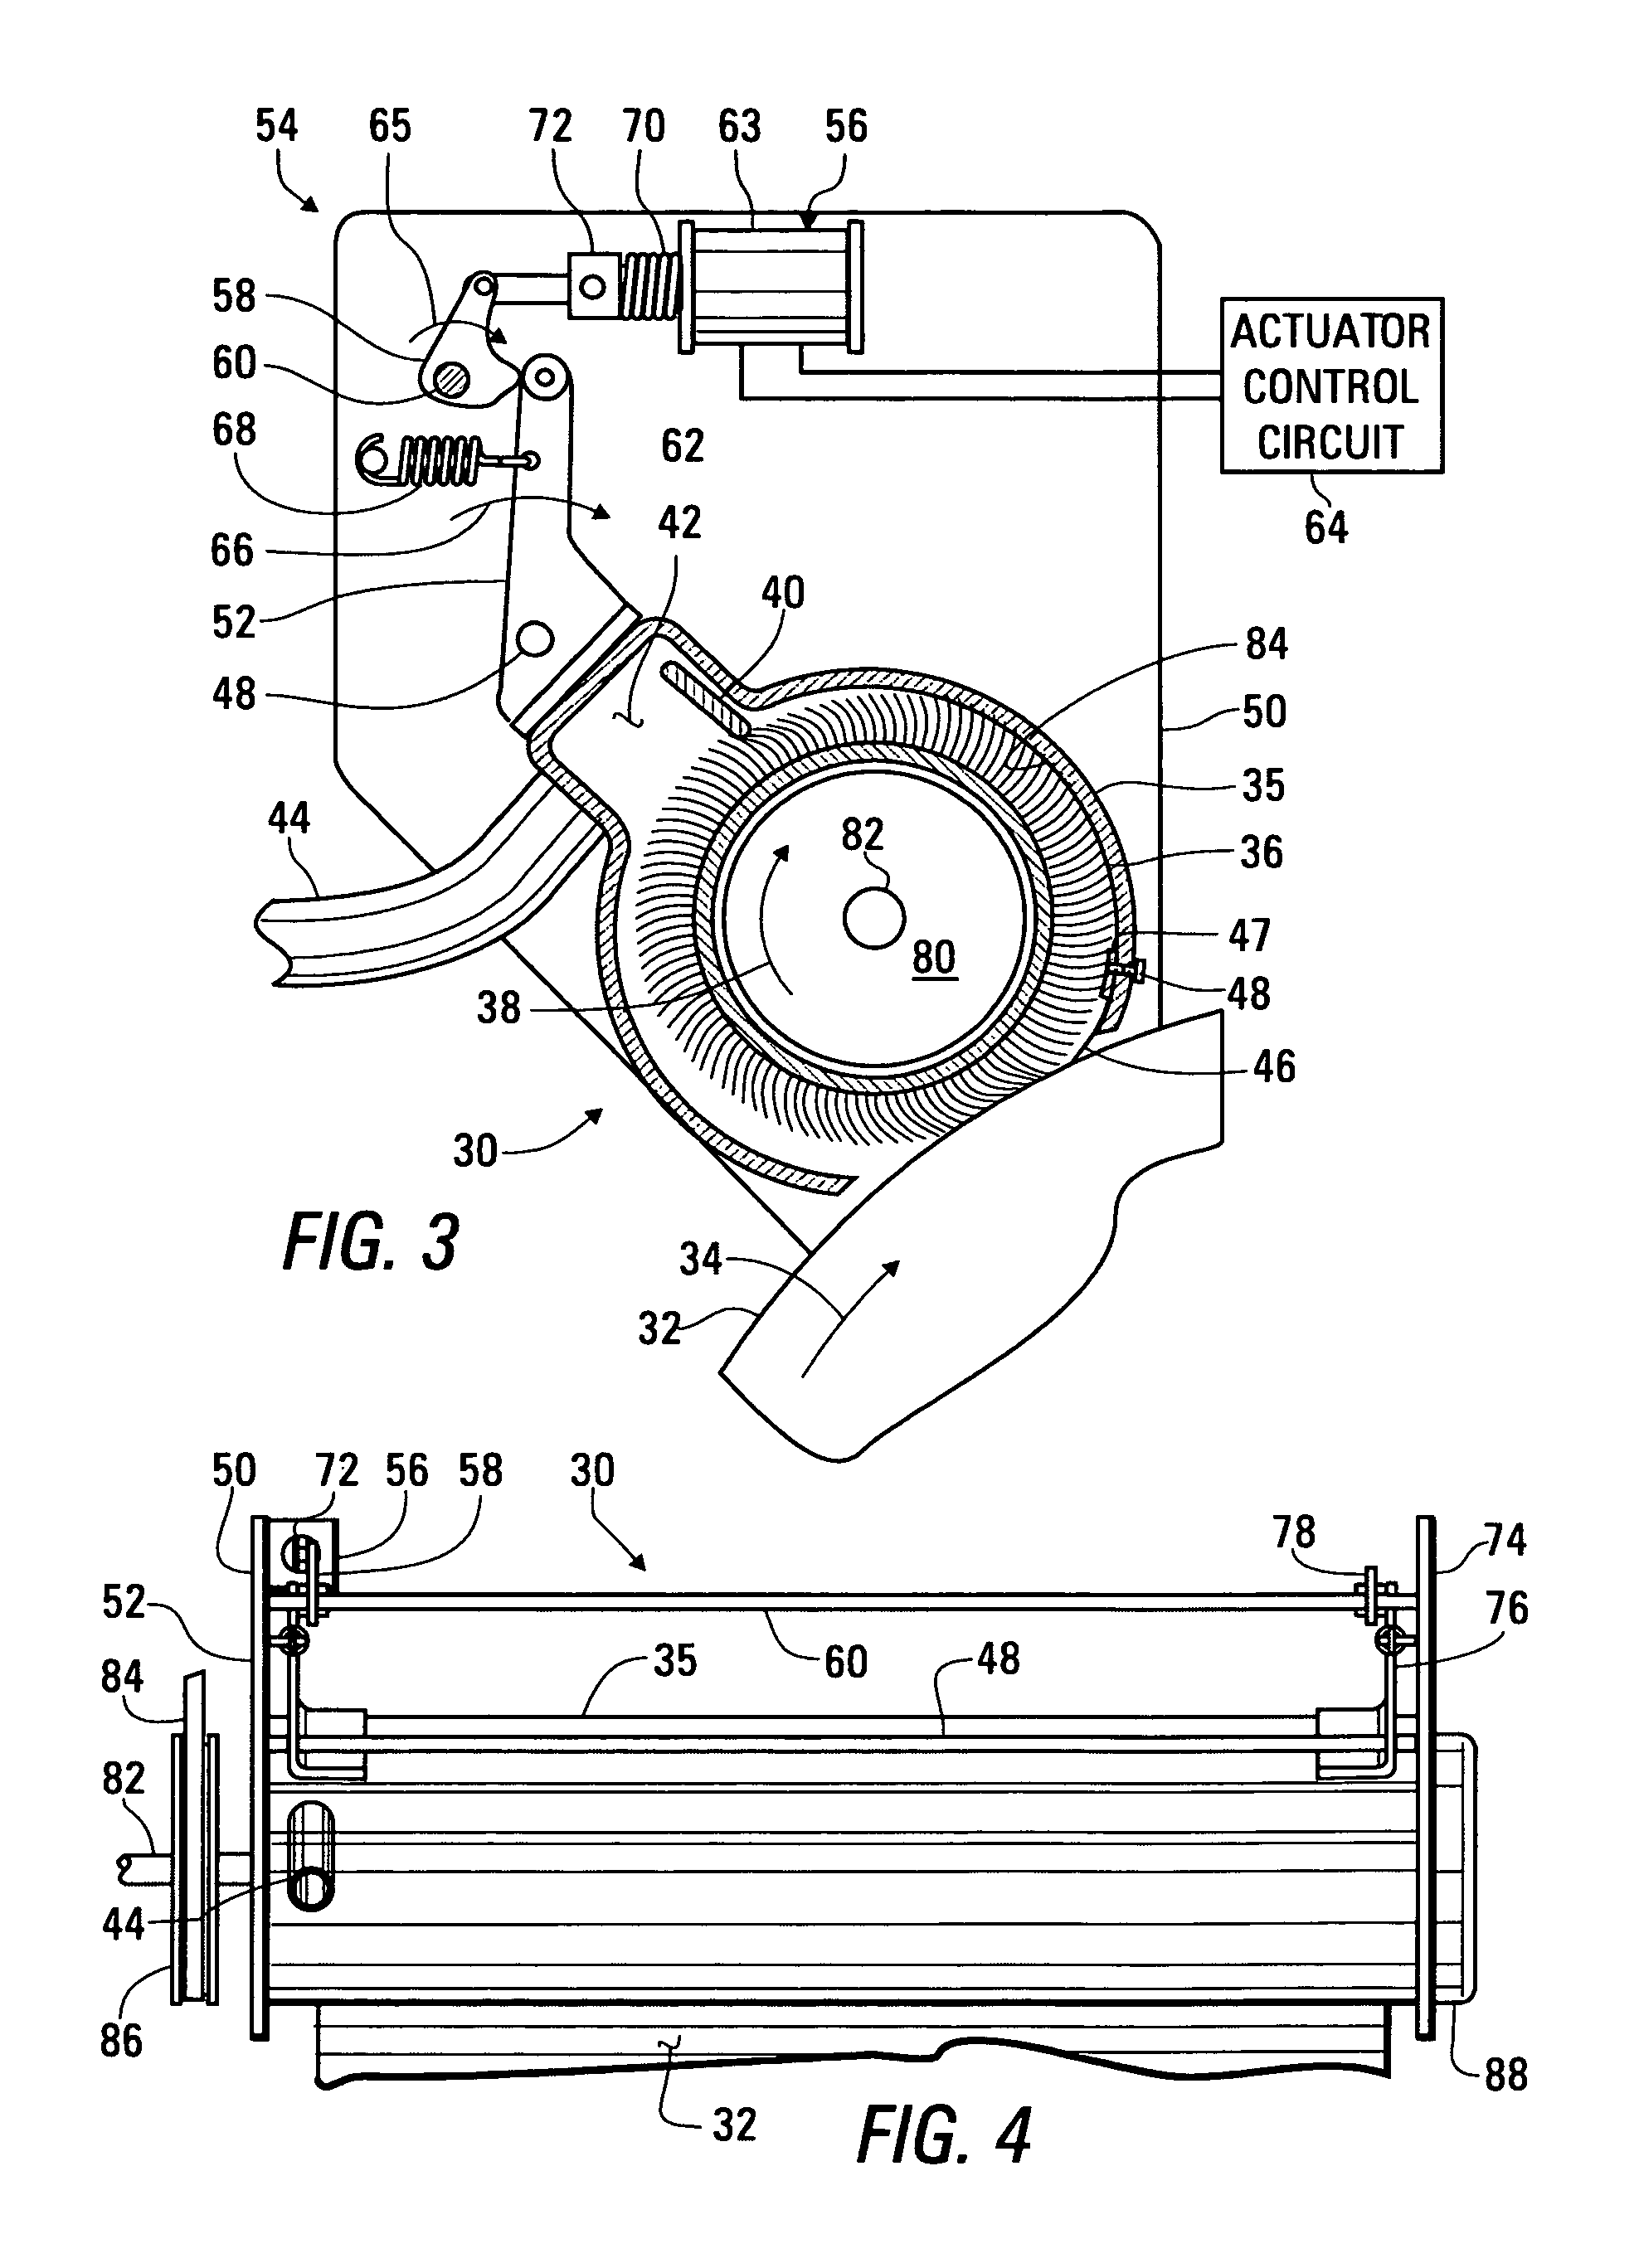 Apparatus and method for cleaning residual toner with a scraper blade periodically held in contact with a toner transfer surface